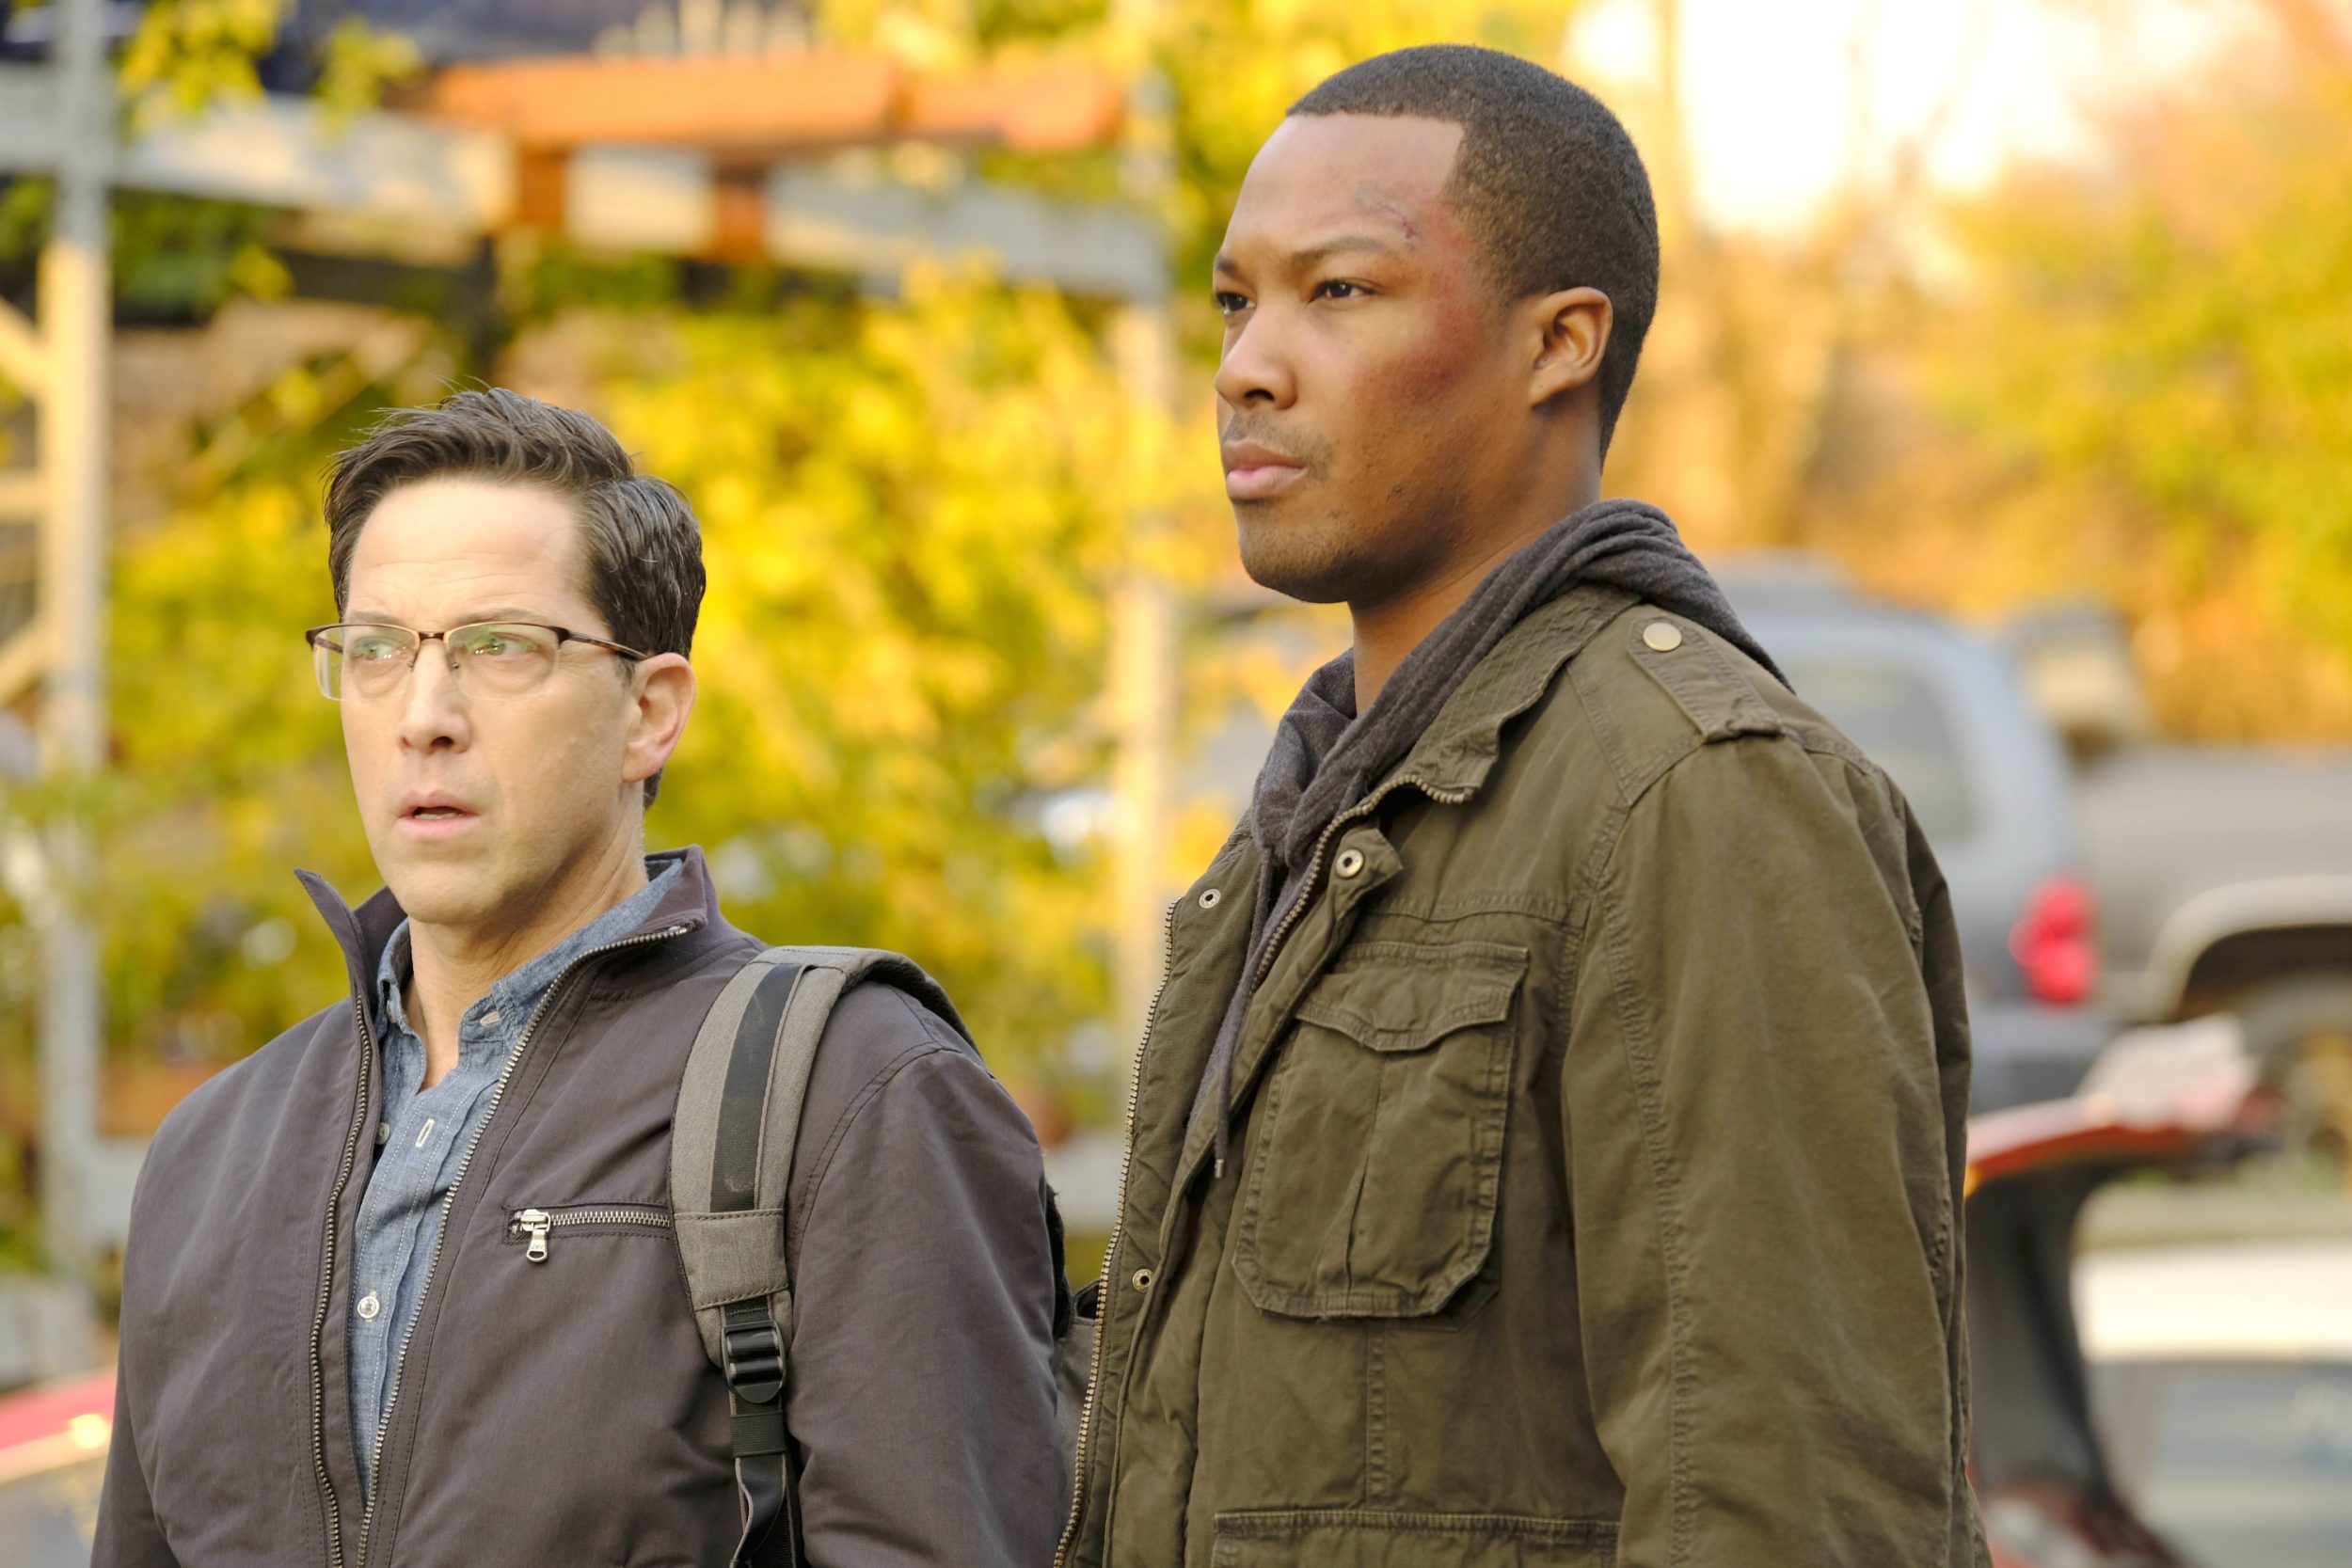 24: LEGACY: L-R: Dan Bucatinsky and Corey Hawkins in the new Ò6:00 PM-7:00 PMÓ episode of 24: LEGACY airing Monday, March 13 (8:00-9:01 PM ET/PT) on FOX. ©2017 Fox Broadcasting Co. Cr: Guy D'Alema/FOX